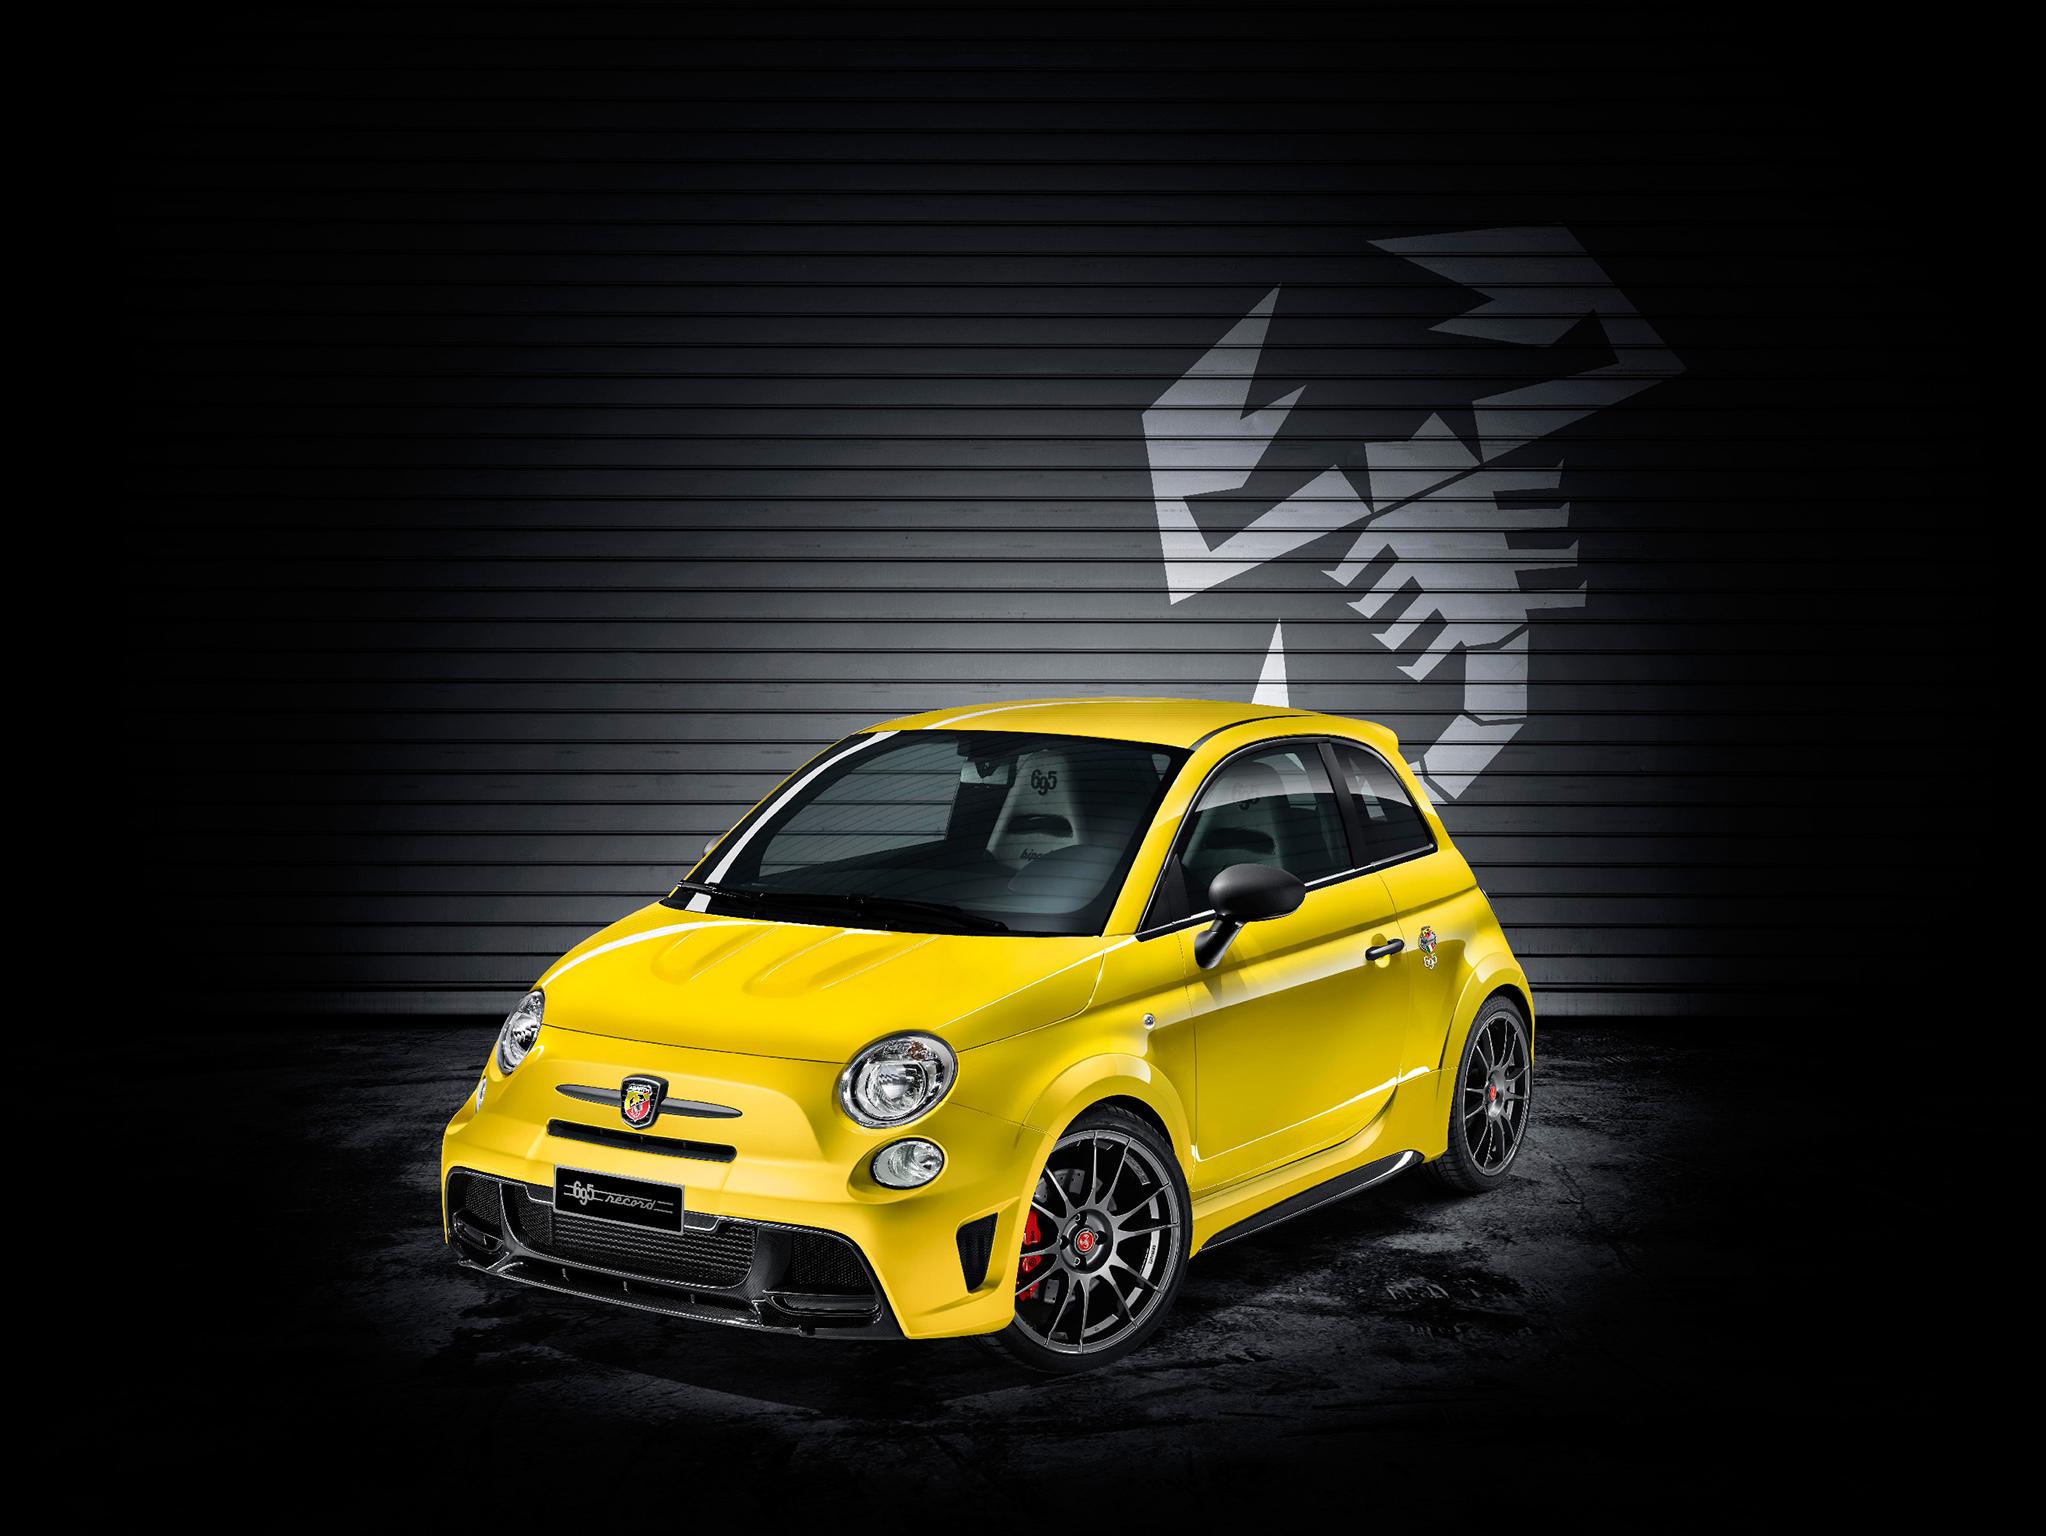 The Abarth 695 Biposto Record certainly looks the part